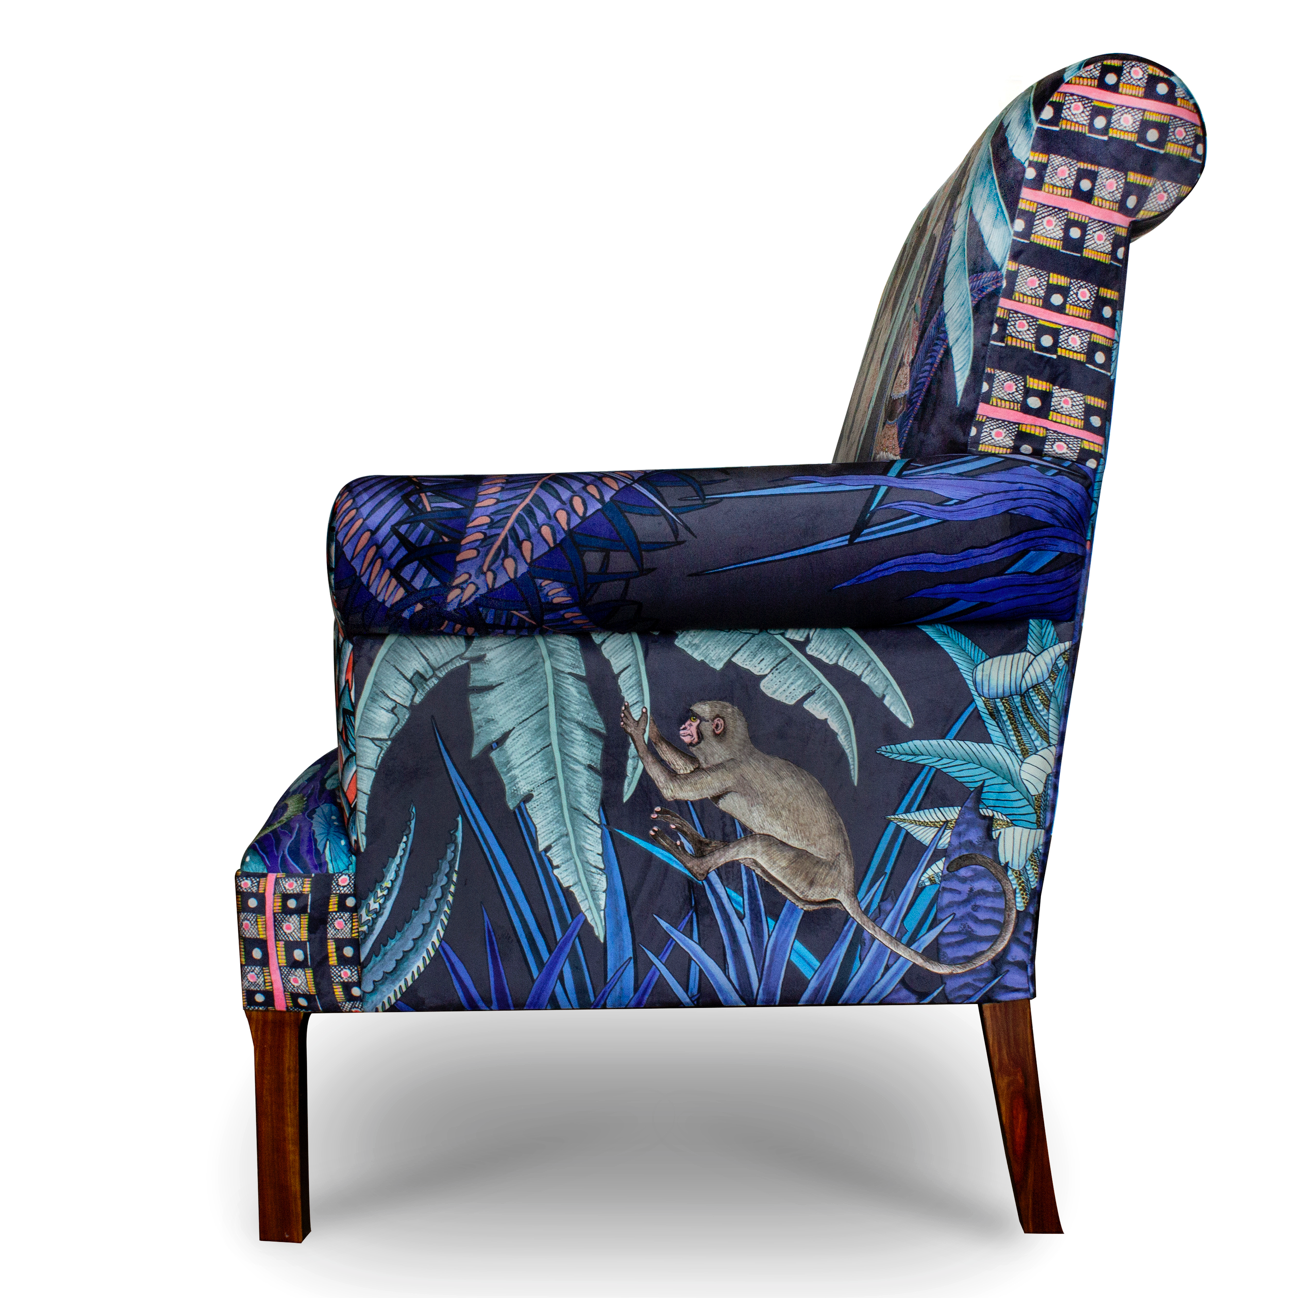 Sabie Tanzanite Limited Edition Sofa by Ardmore handmade in South Africa**